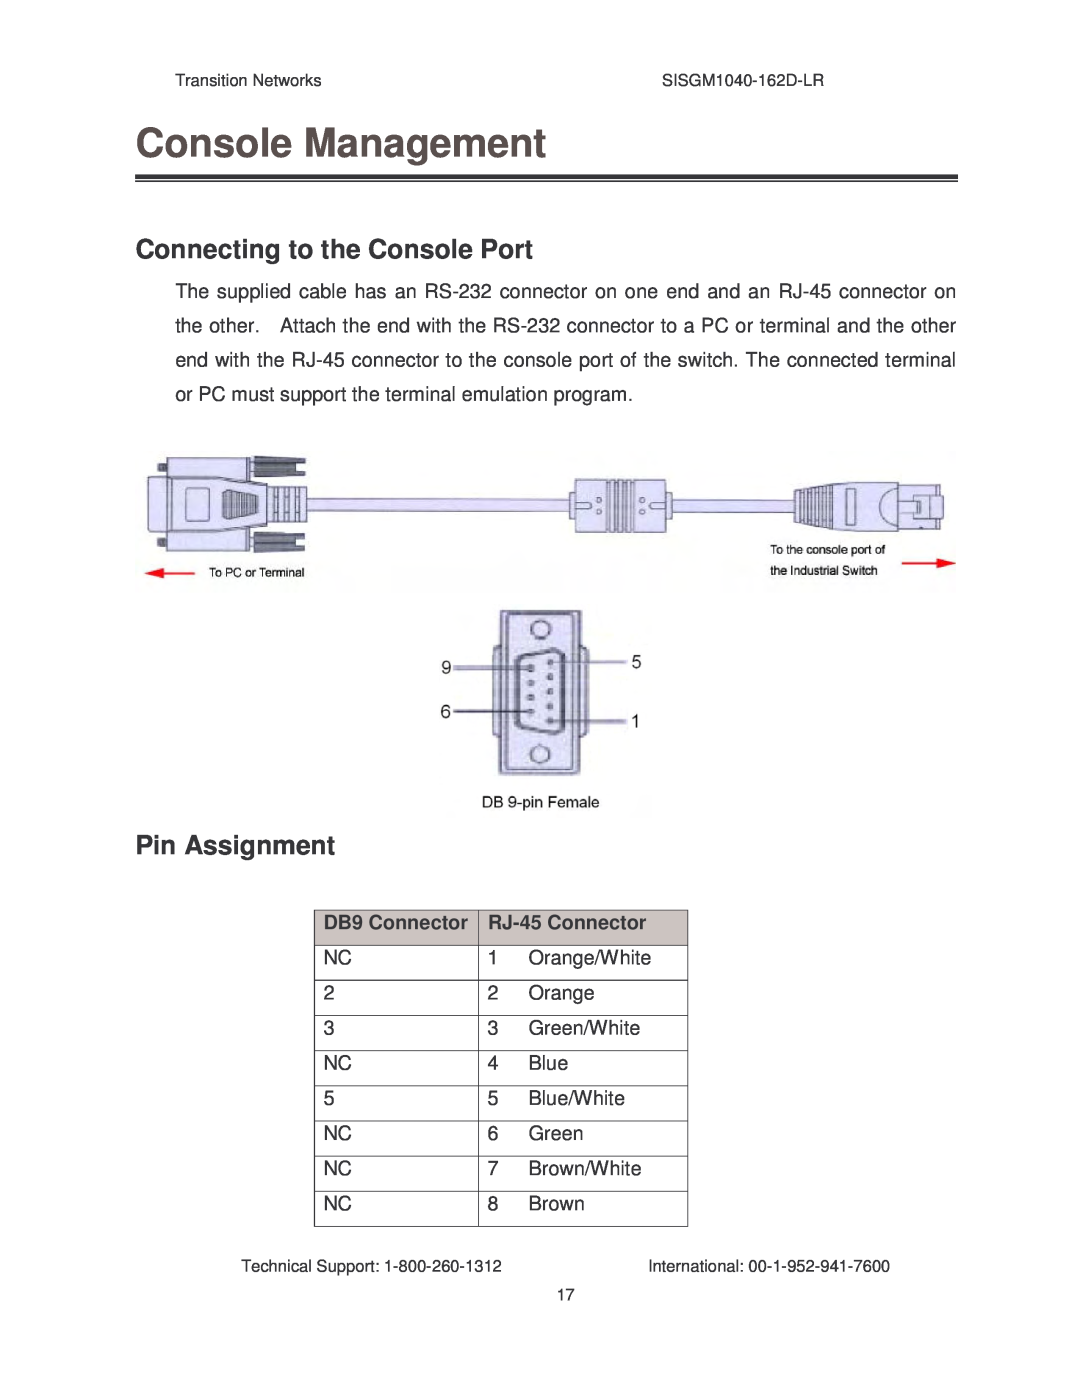 Transition Networks SISGM1040-162D manual Pin Assignment, Console Management, Connecting to the Console Port 